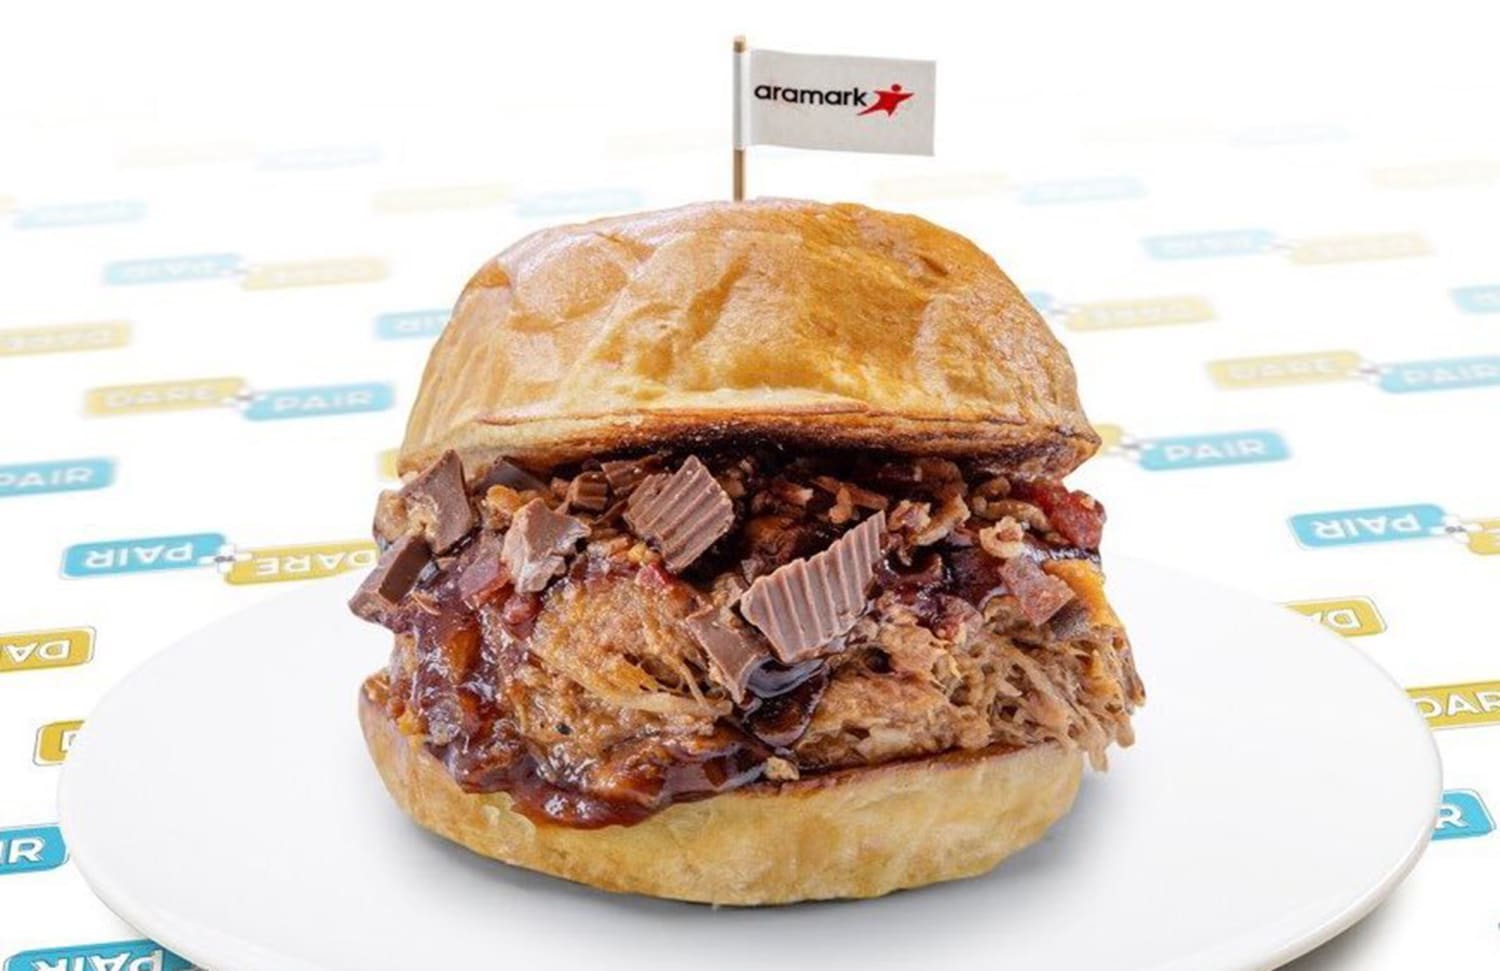 Barbecue Pork Sandwich With Reese's Peanut Butter Cups Goes Viral